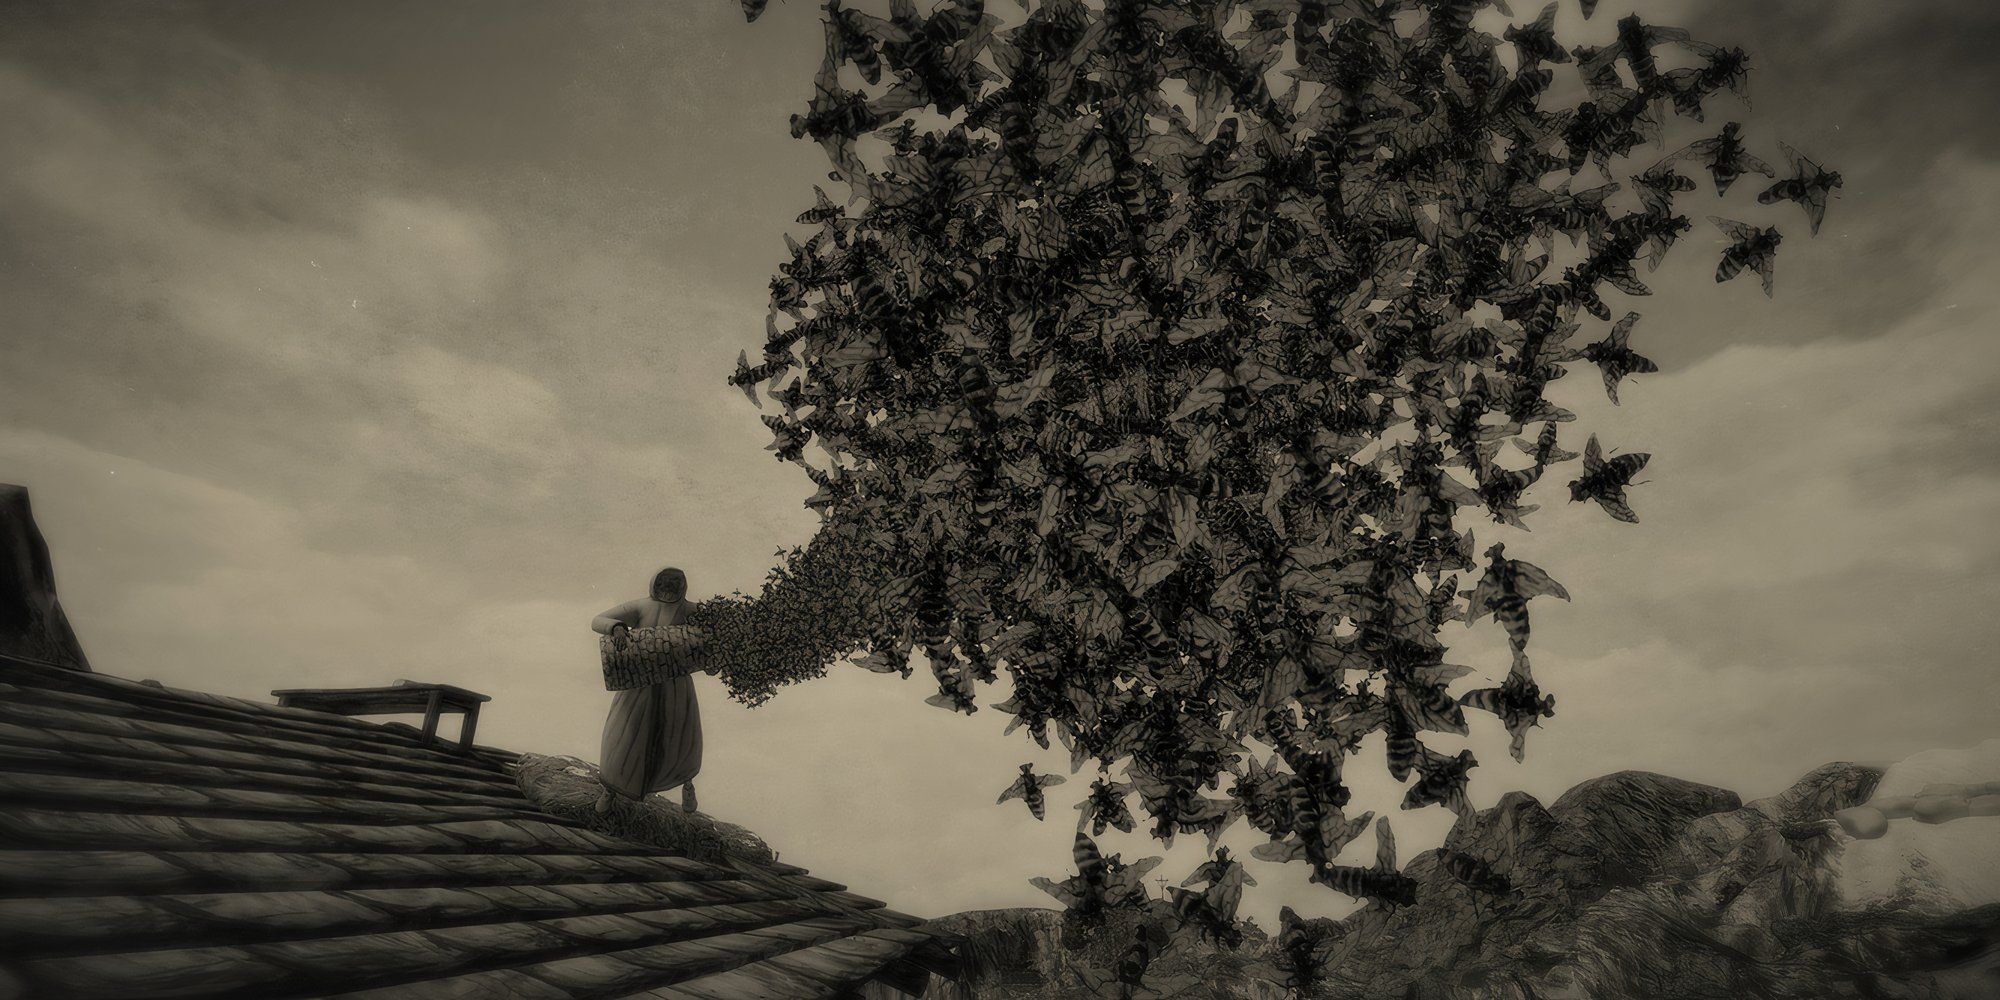 8 Great Folk Horror Video Games A person standing on a roof with a swarm of flying creatures